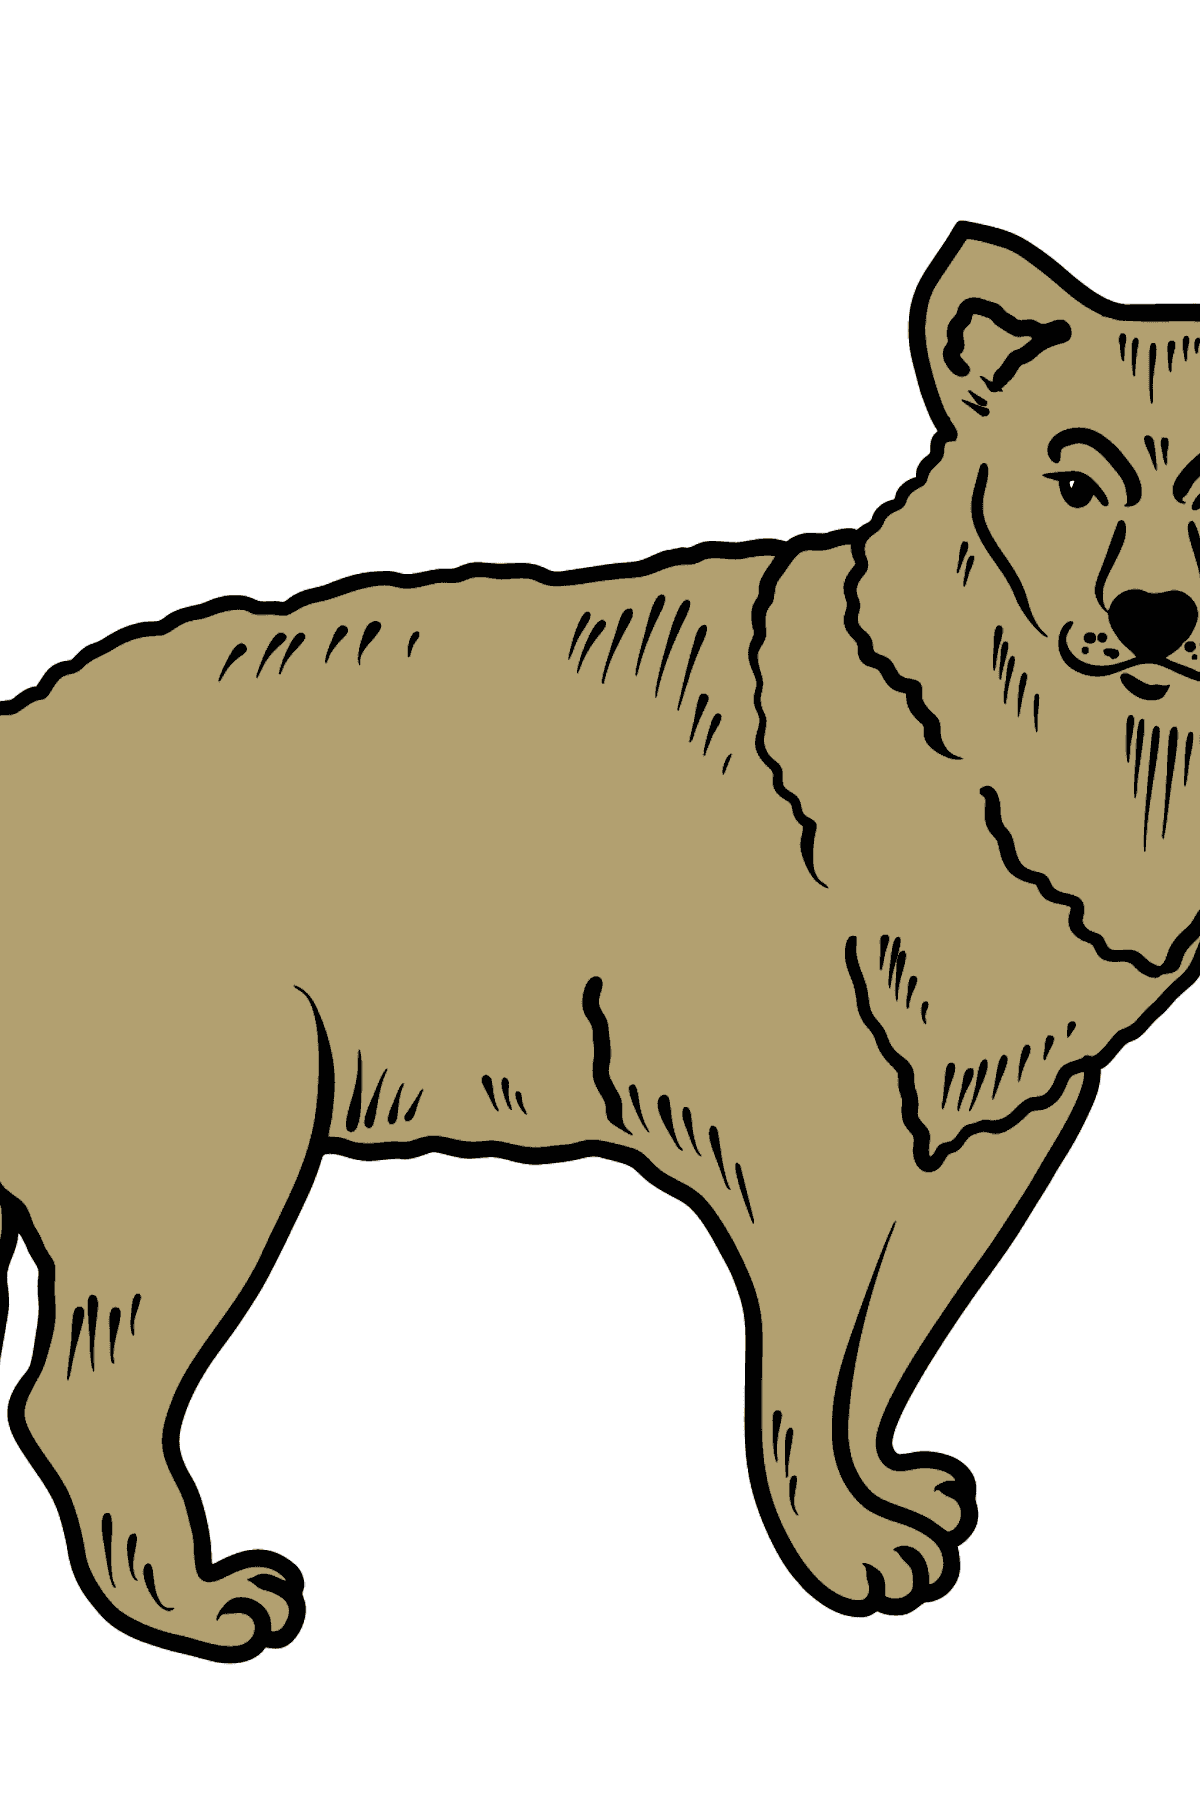 Coyote coloring page - Coloring Pages for Kids